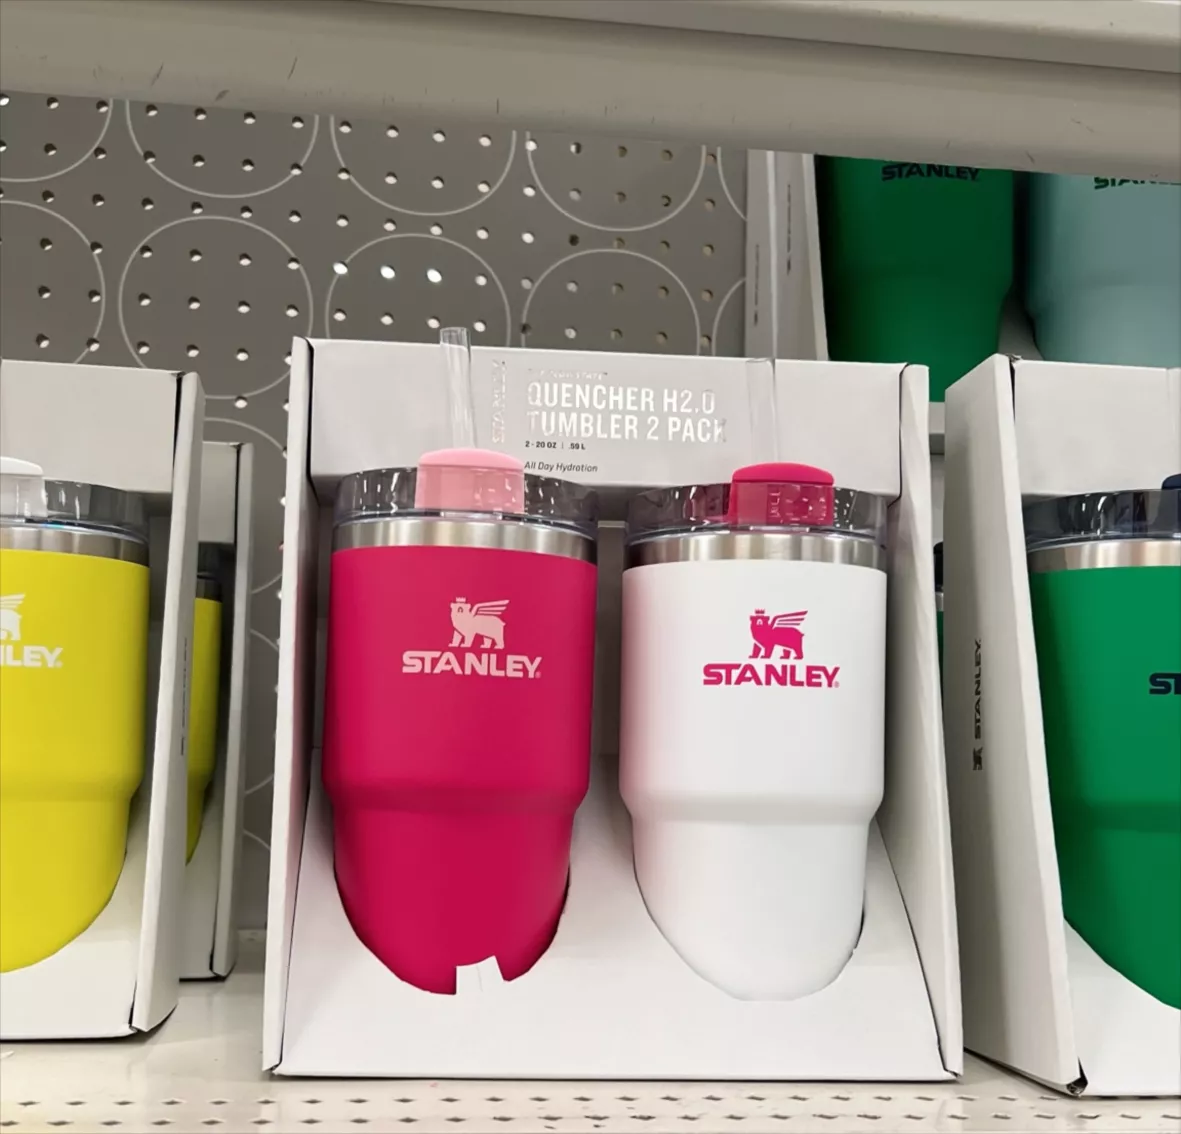 Stanley Bottles on Sale  2-Pack Tumbler Just $19.95! TODAY!